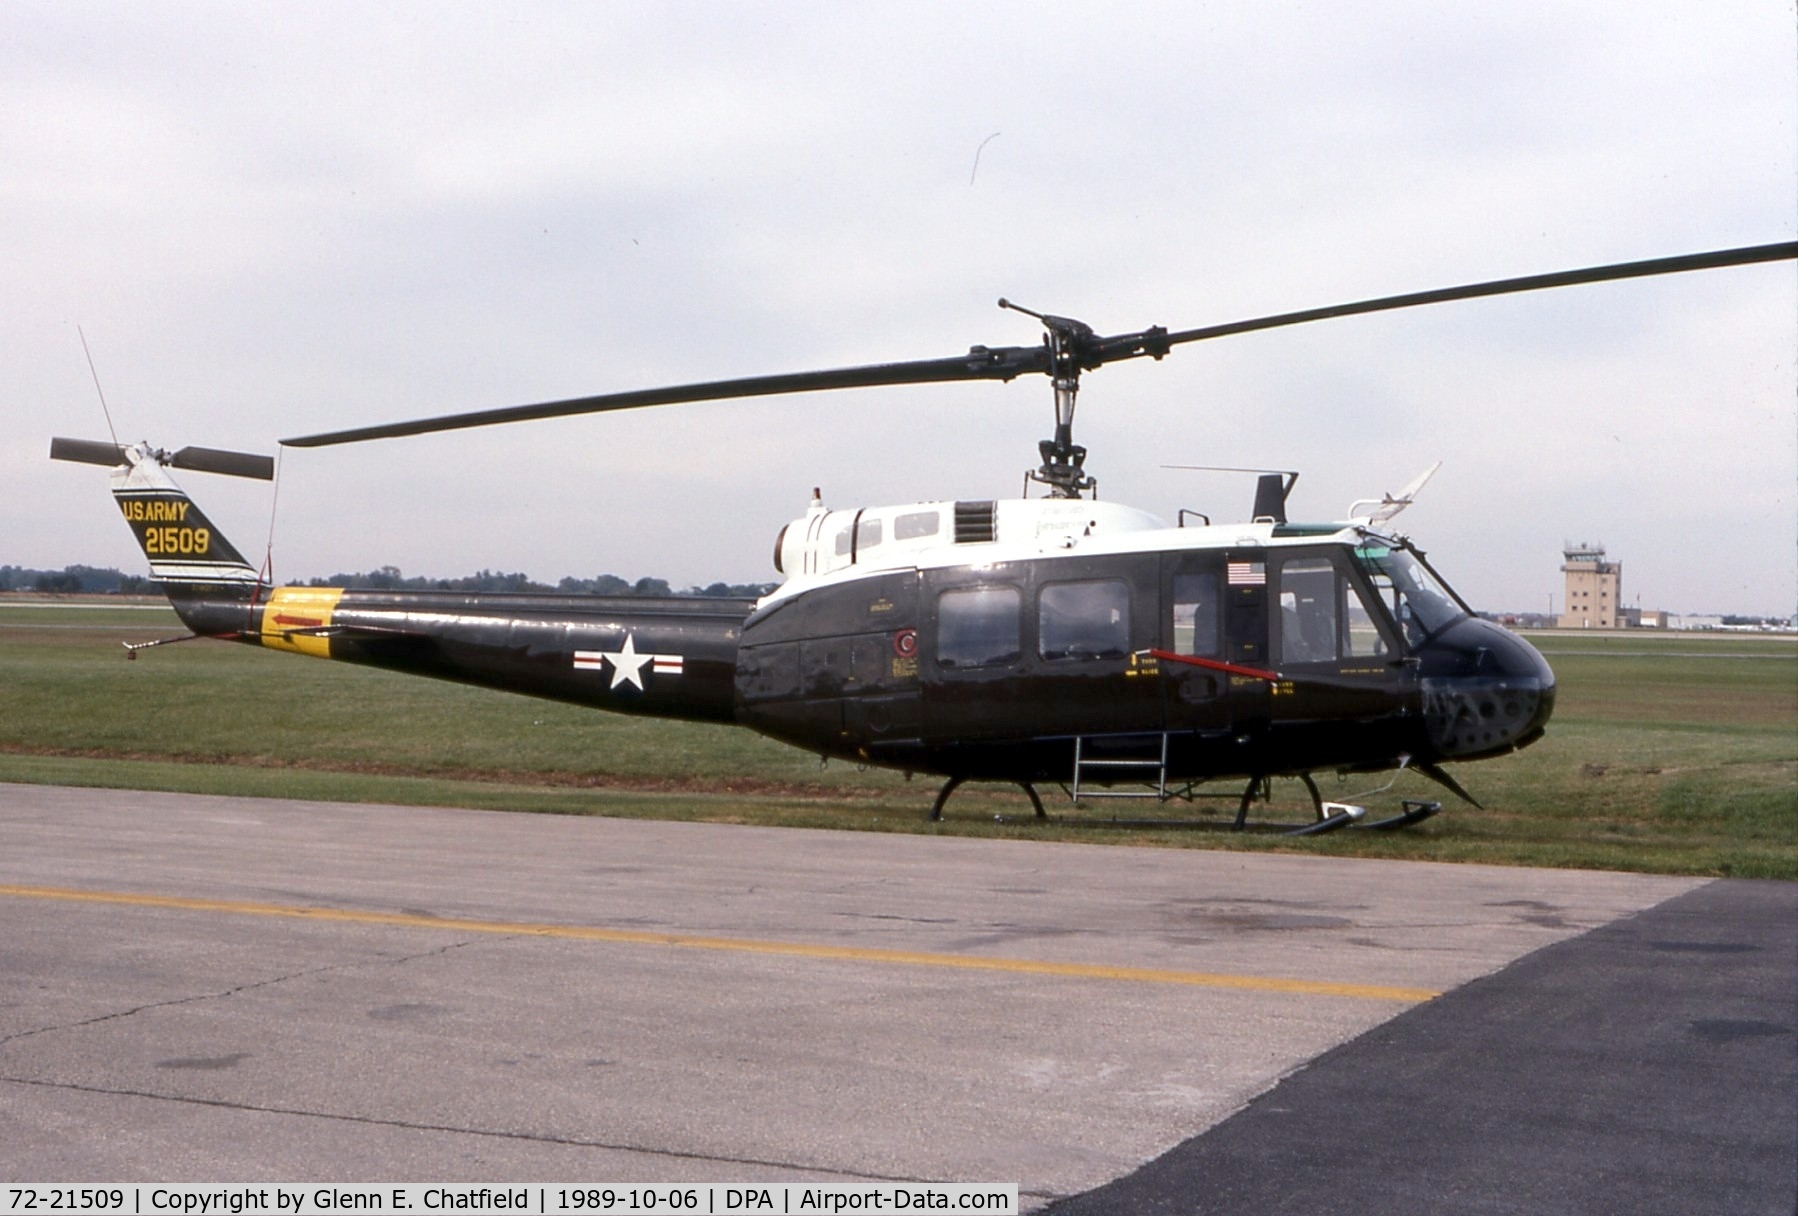 72-21509, 1972 Bell UH-1H Iroquois C/N 13208, Now active as G-UHIH